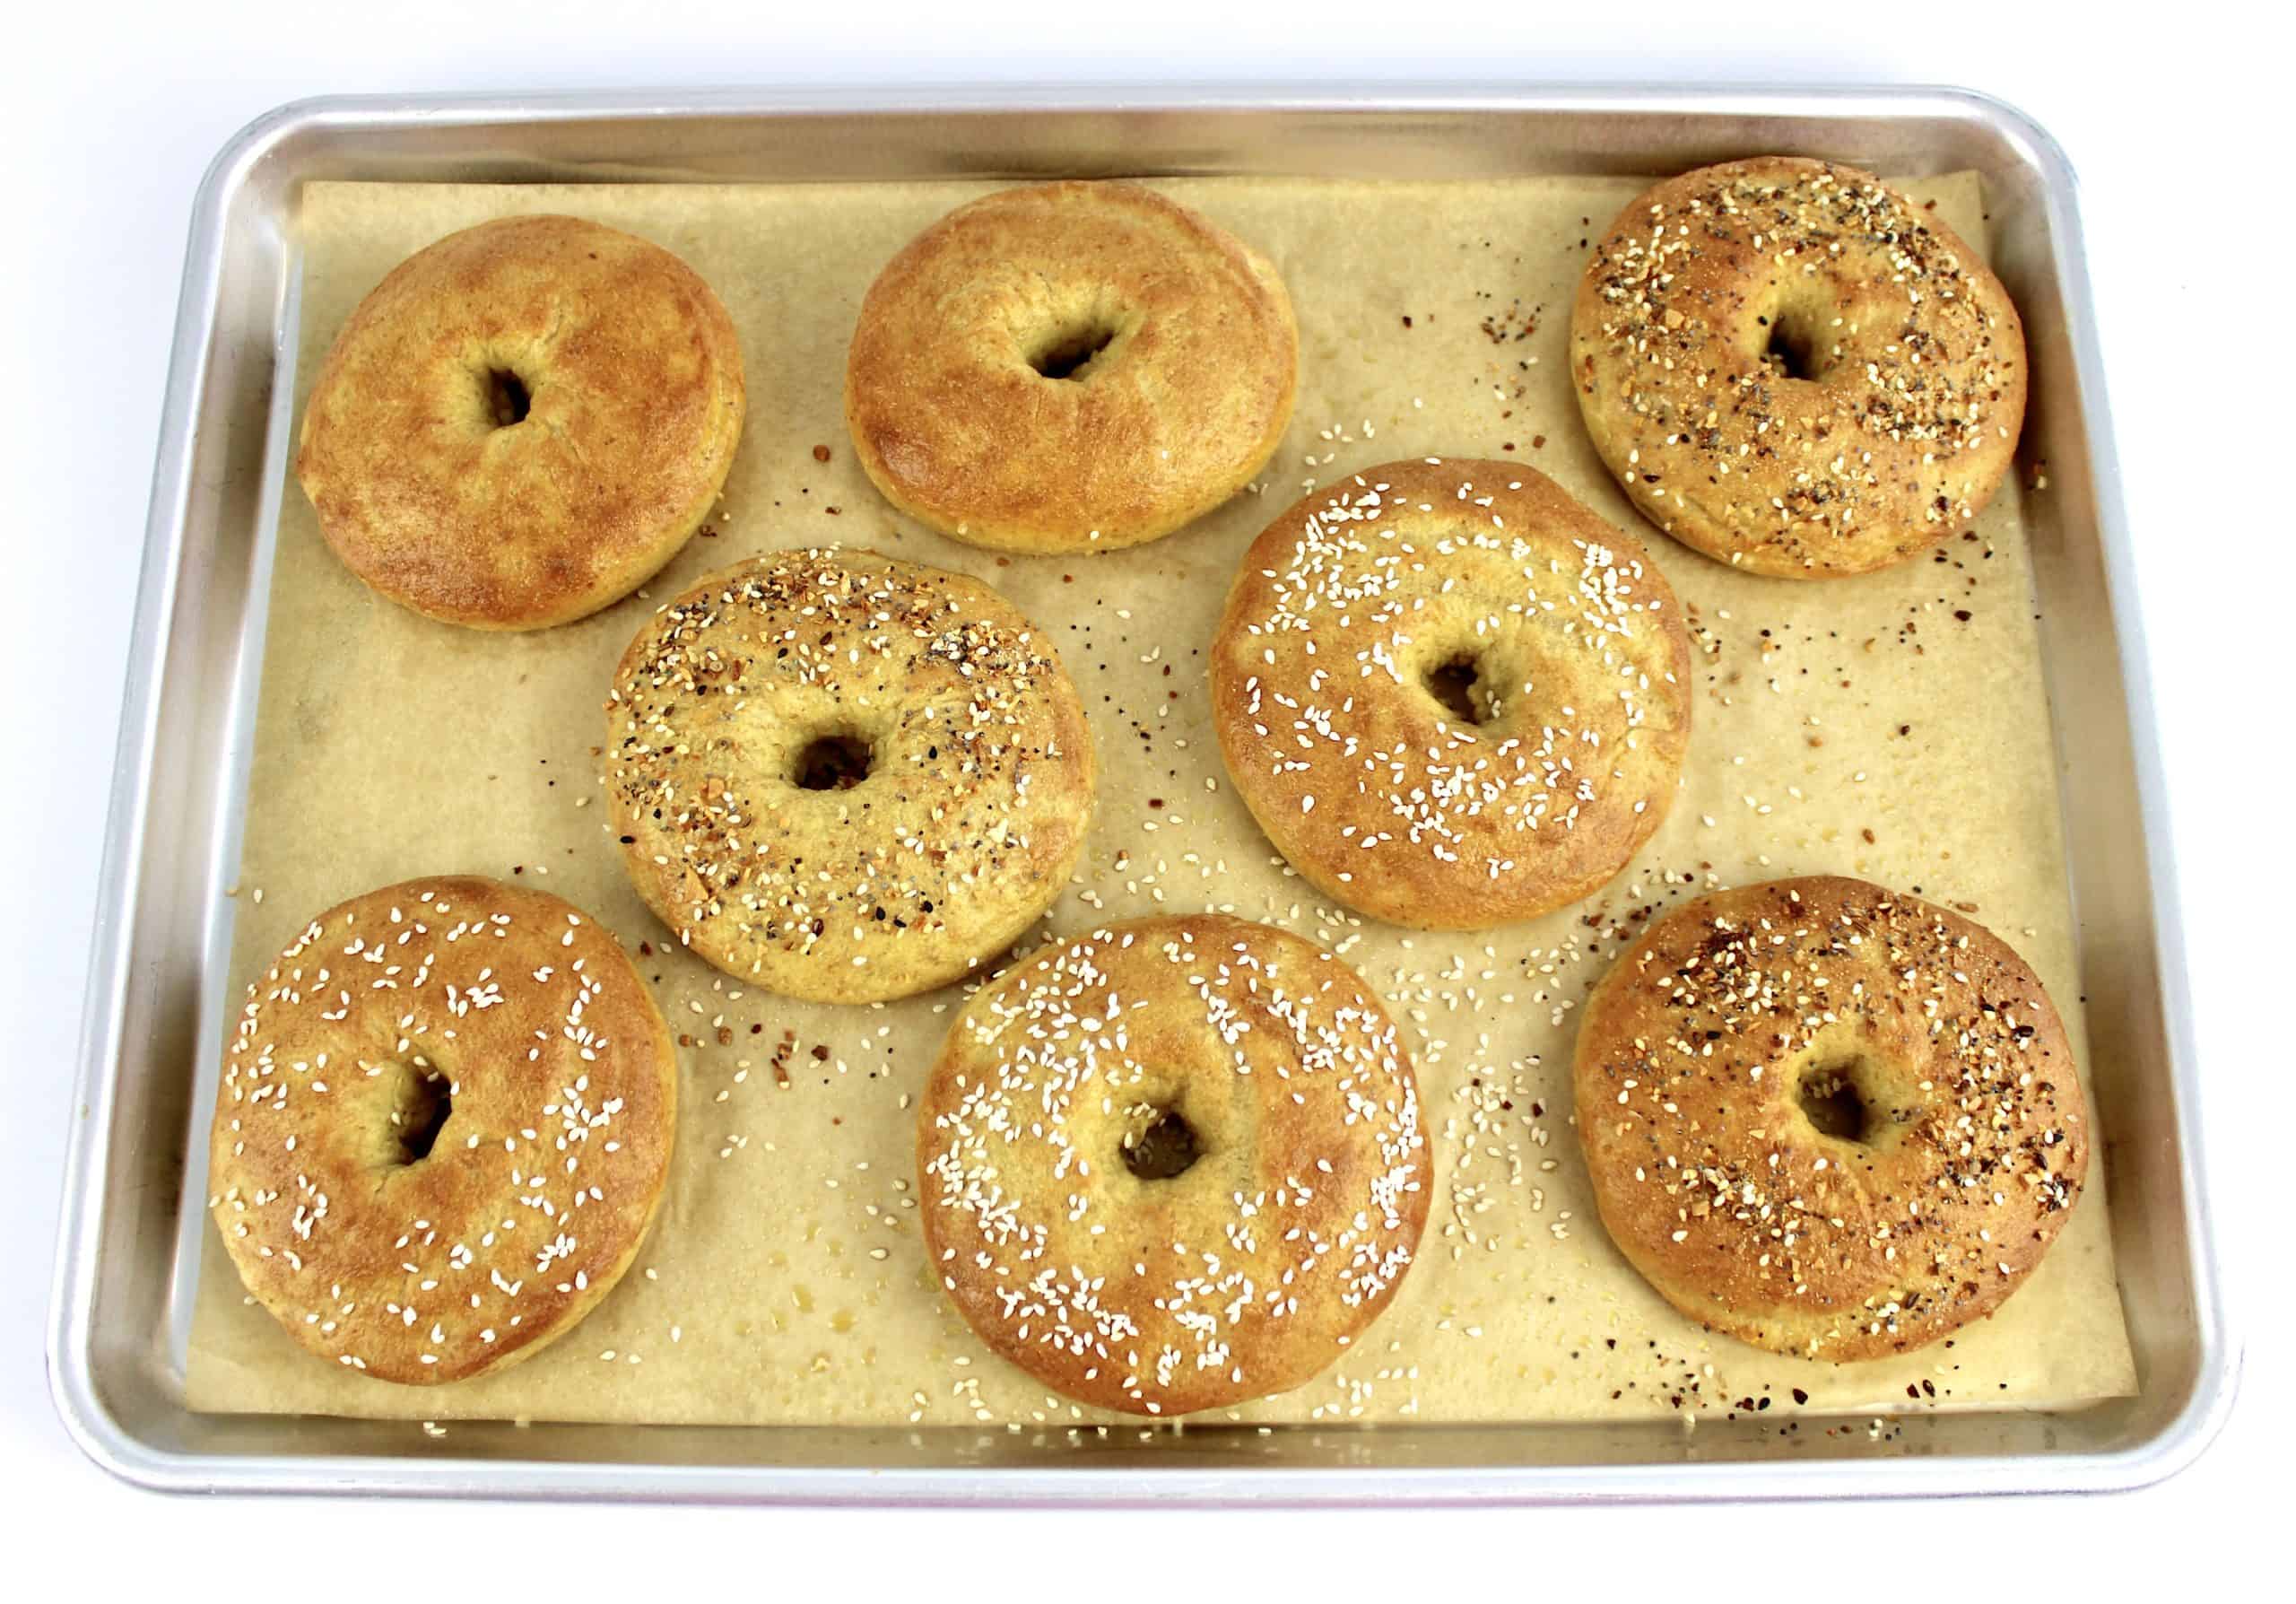 8 baked bagels on parchment lined baking sheet